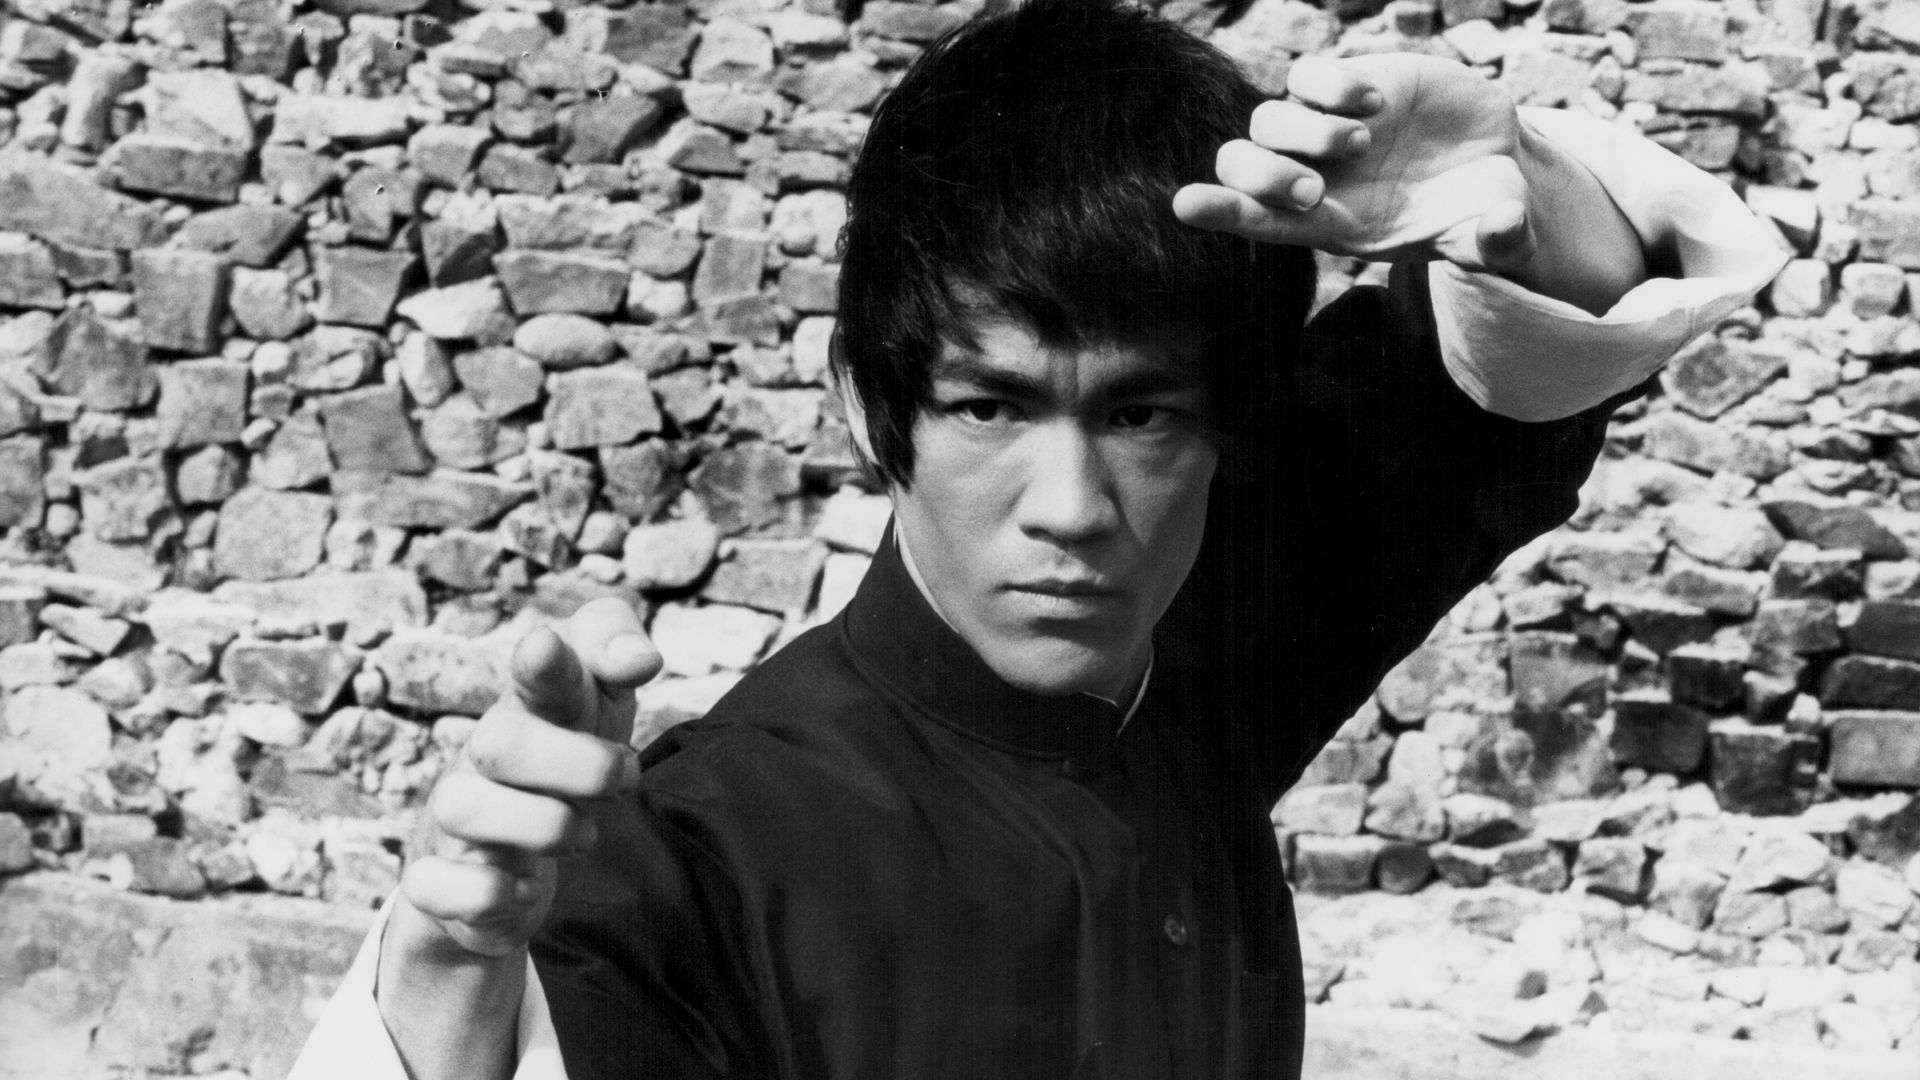 Bruce Lee stands with his arms up as if ready to engage in a fight. Photo is black and white.